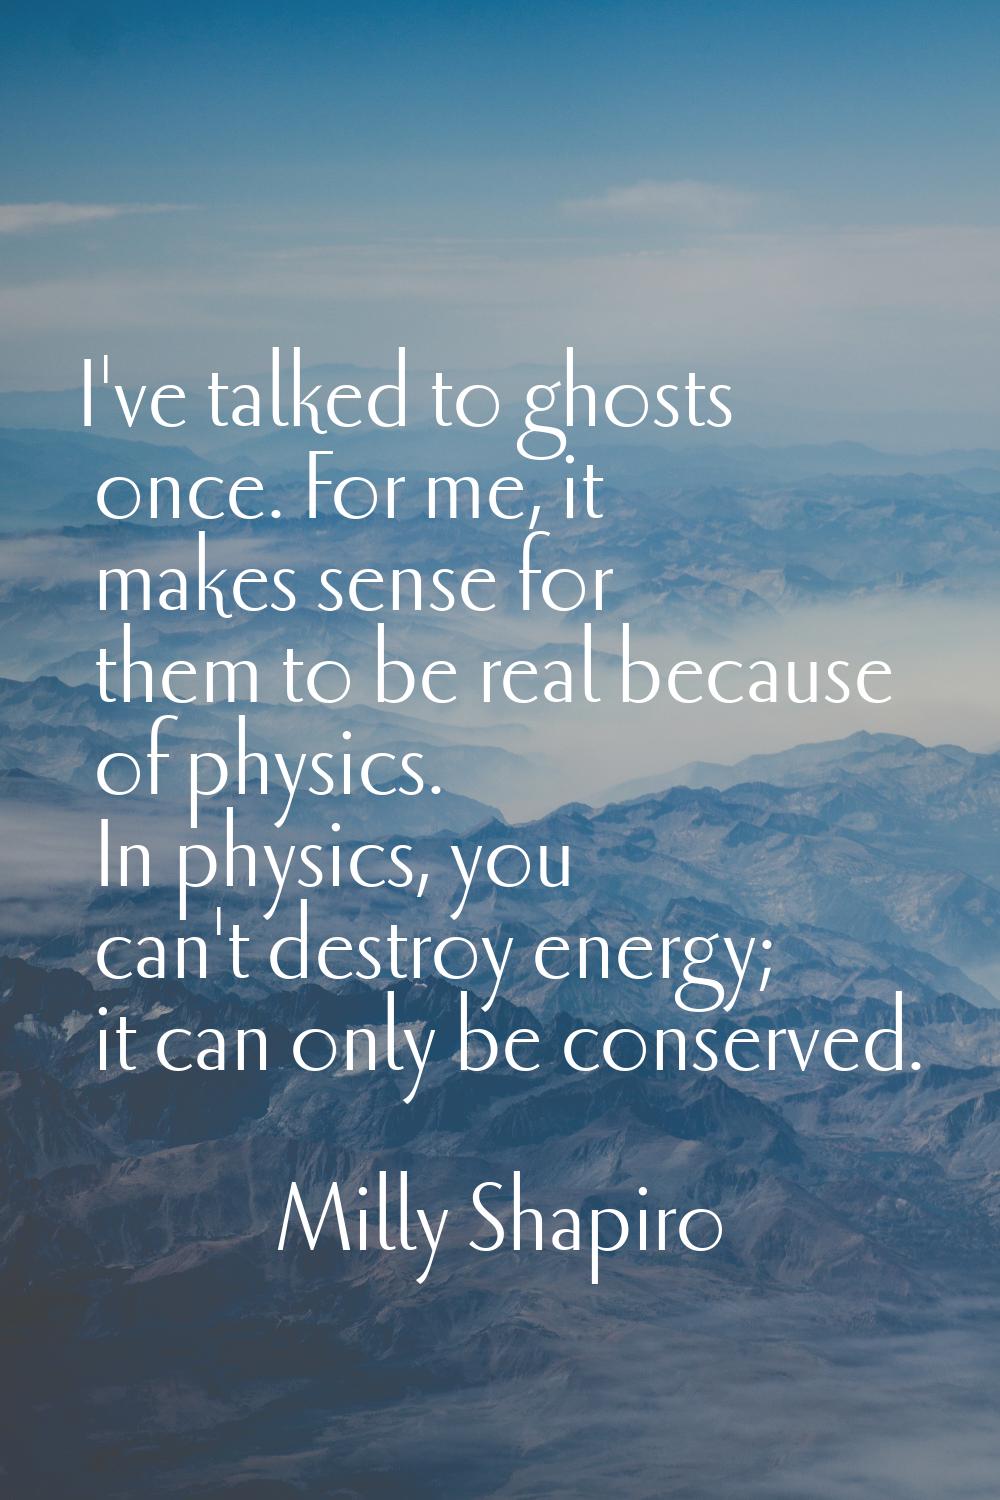 I've talked to ghosts once. For me, it makes sense for them to be real because of physics. In physi